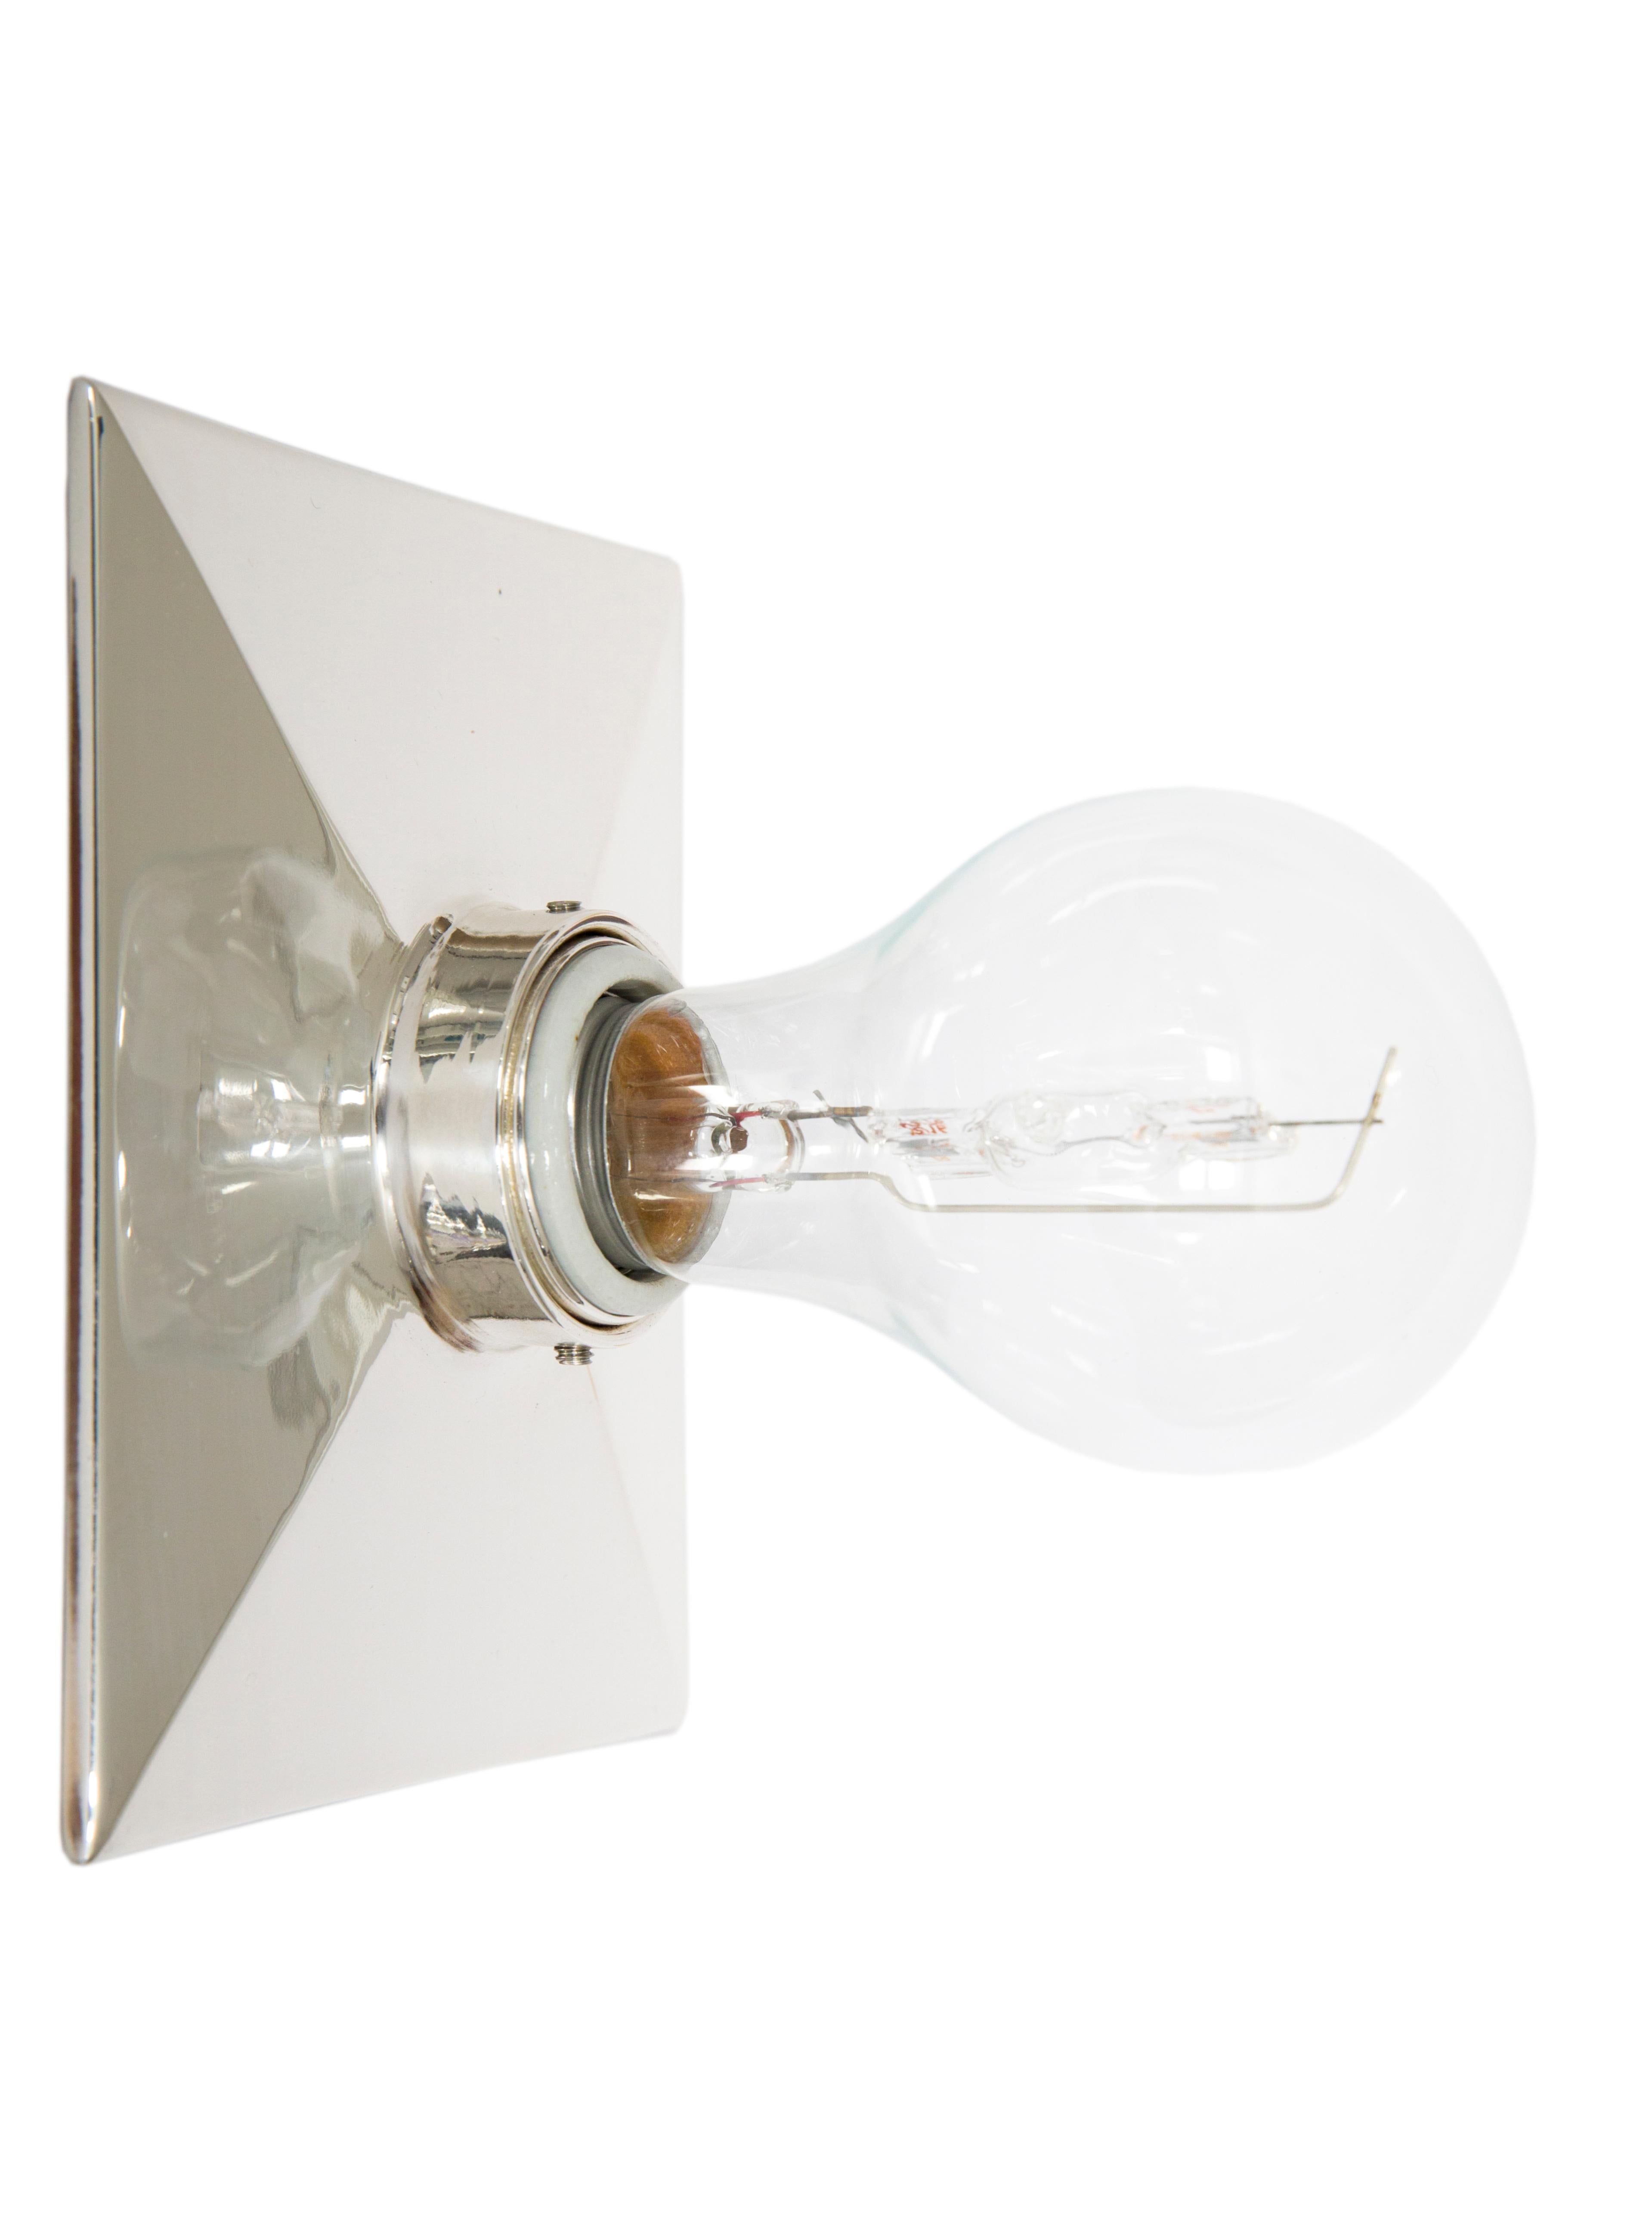 The Vica Light is a rectangular cast metal escutcheon plate with a beveled edge design and porcelain socket.  The fixture can be wall or ceiling mounted. 

The maximum wattage bulb recommended is 60W. The Vica Light is UL listed.

Handcrafted in the